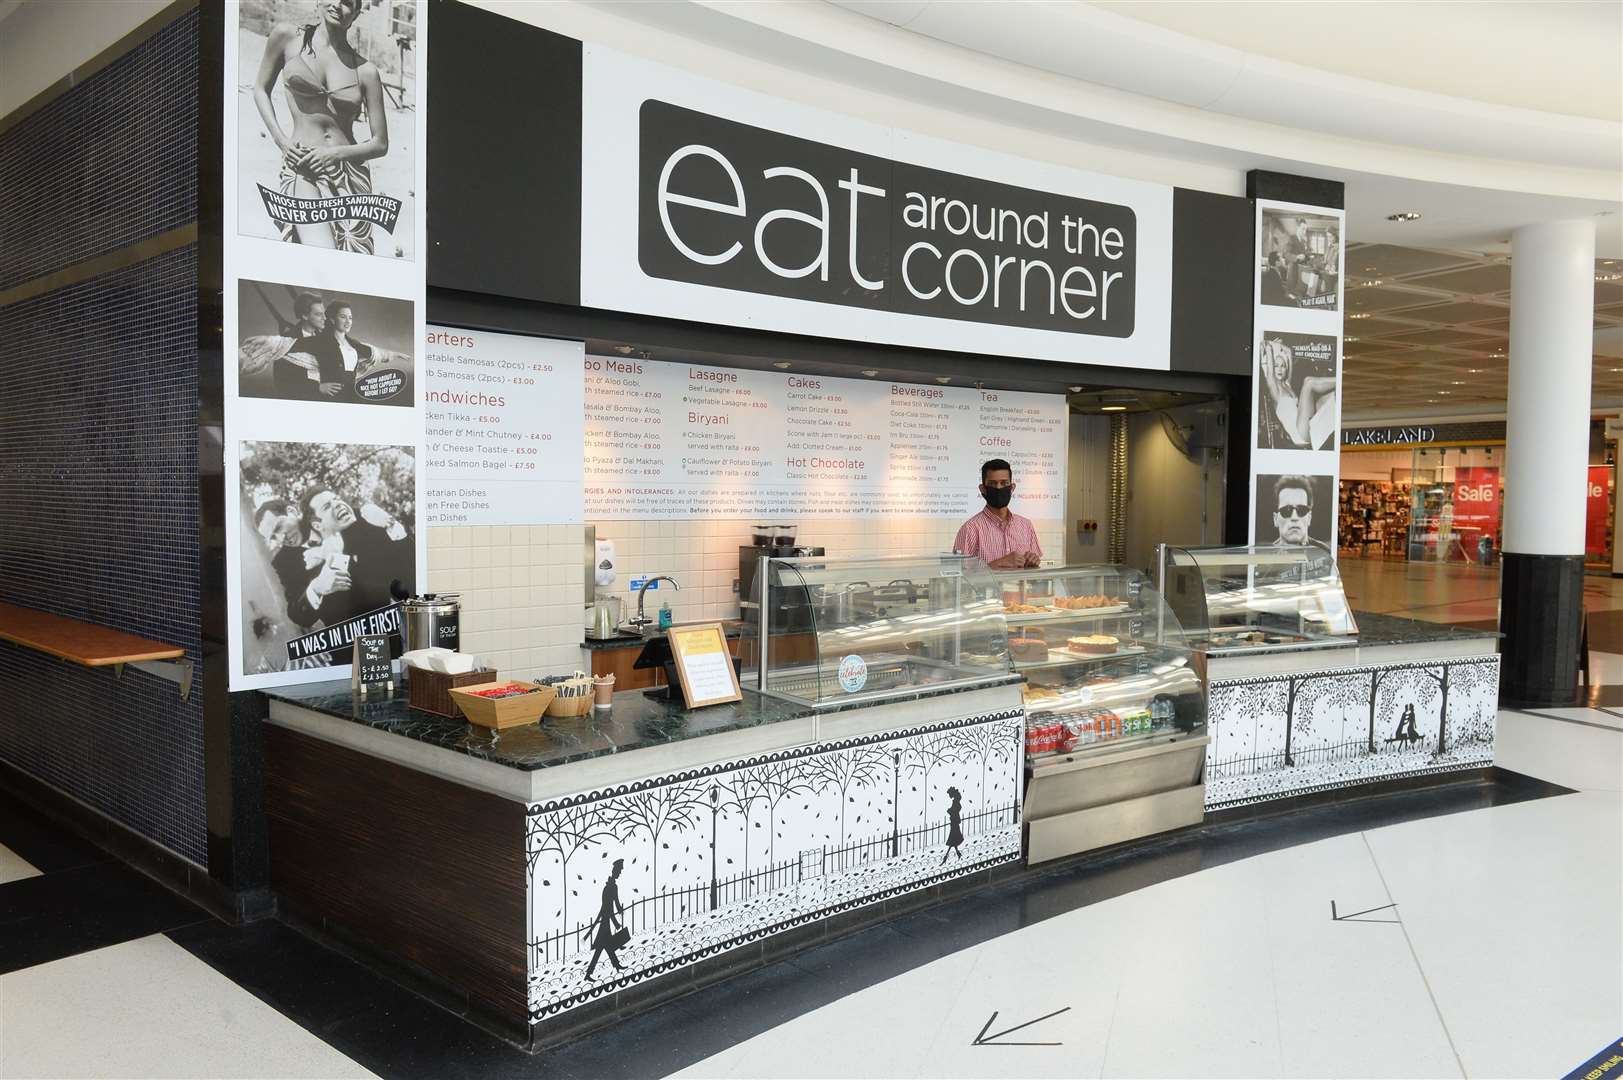 Eat Around the Corner has opened in the Eastgate Shopping Centre in Inverness.